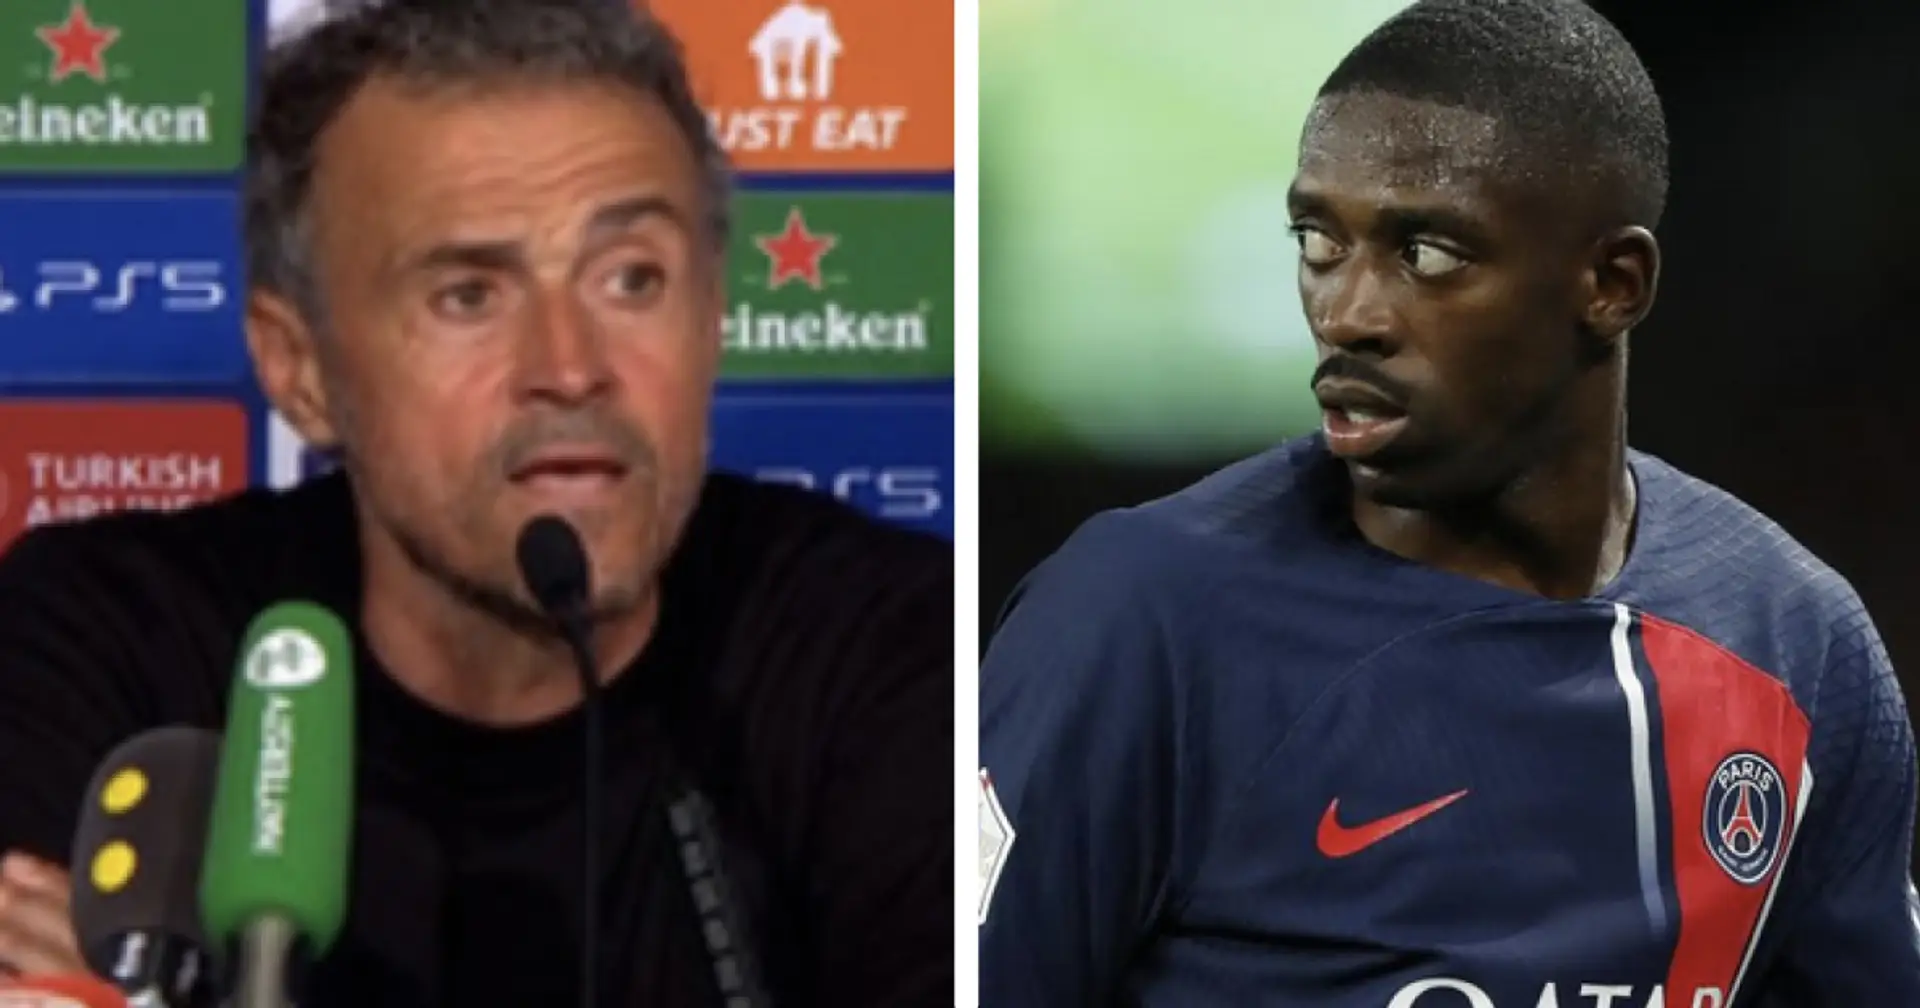 'No point': Luis Enrique reacts to Dembele scoring 0 goals in 8 PSG games